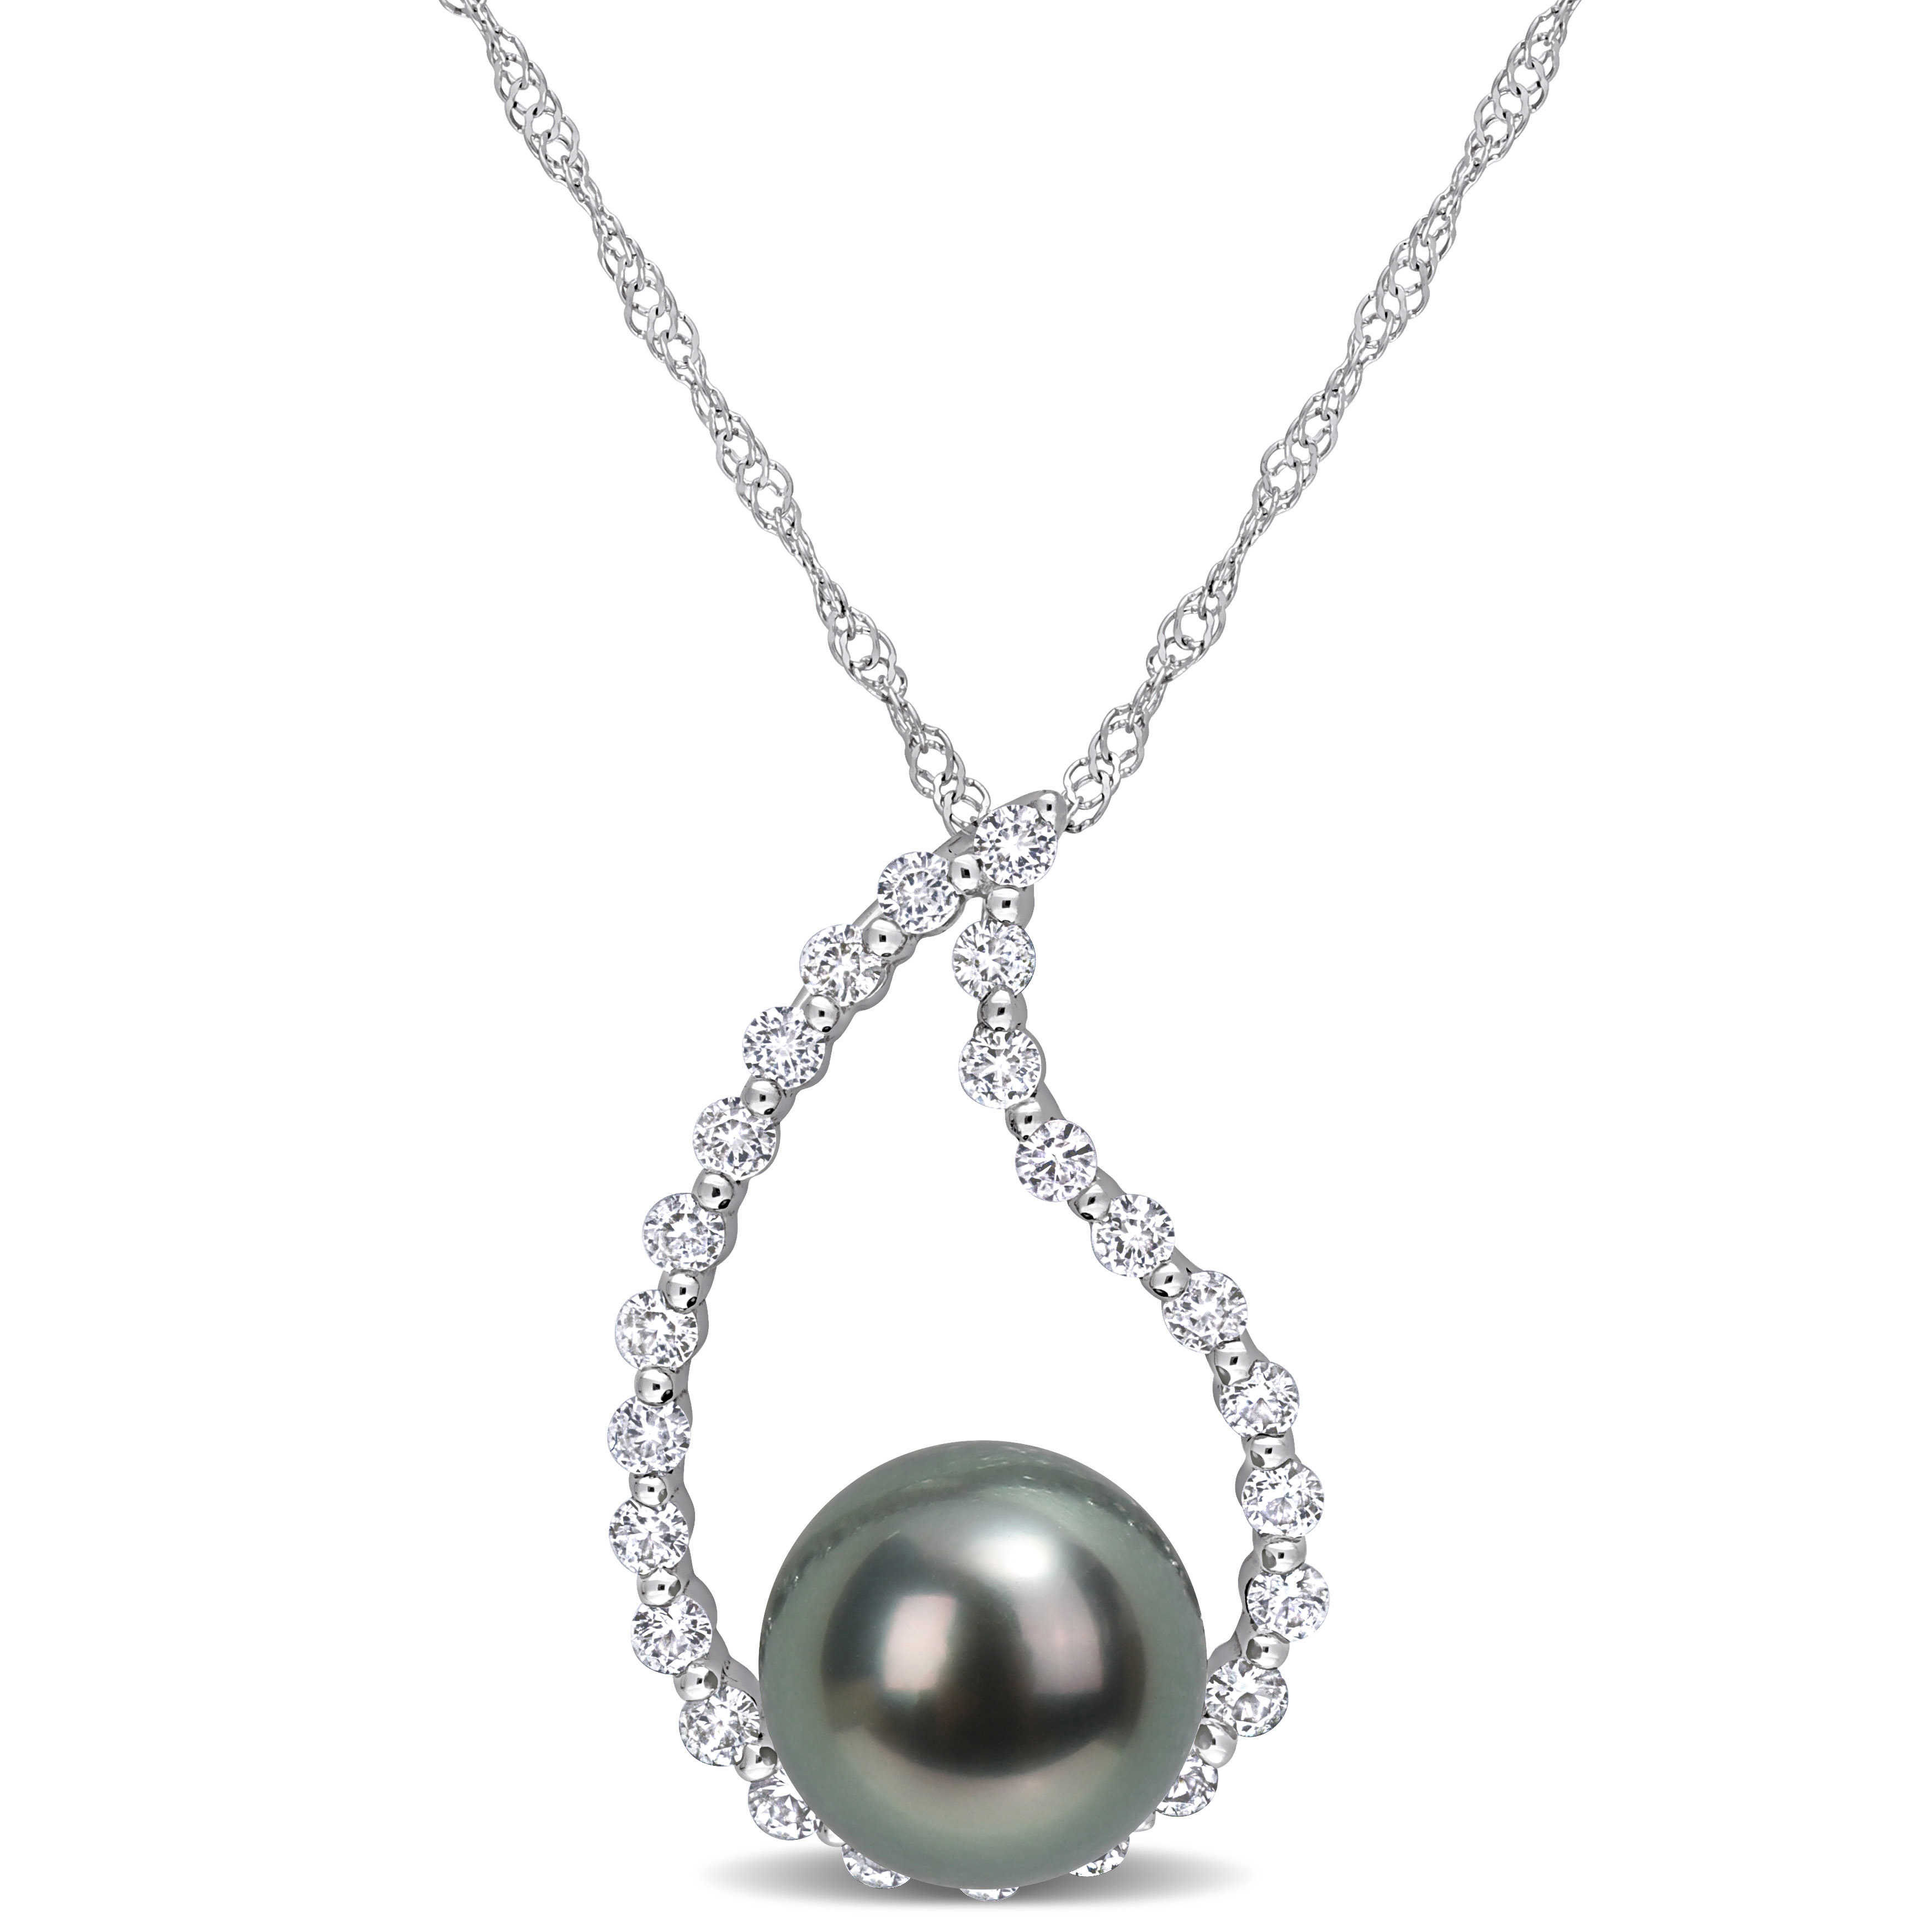 8-8.5 MM Black Tahitian Cultured Pearl and 3/8 CT TGW White Sapphire Teardrop Pendant with Chain in 10k White Gold